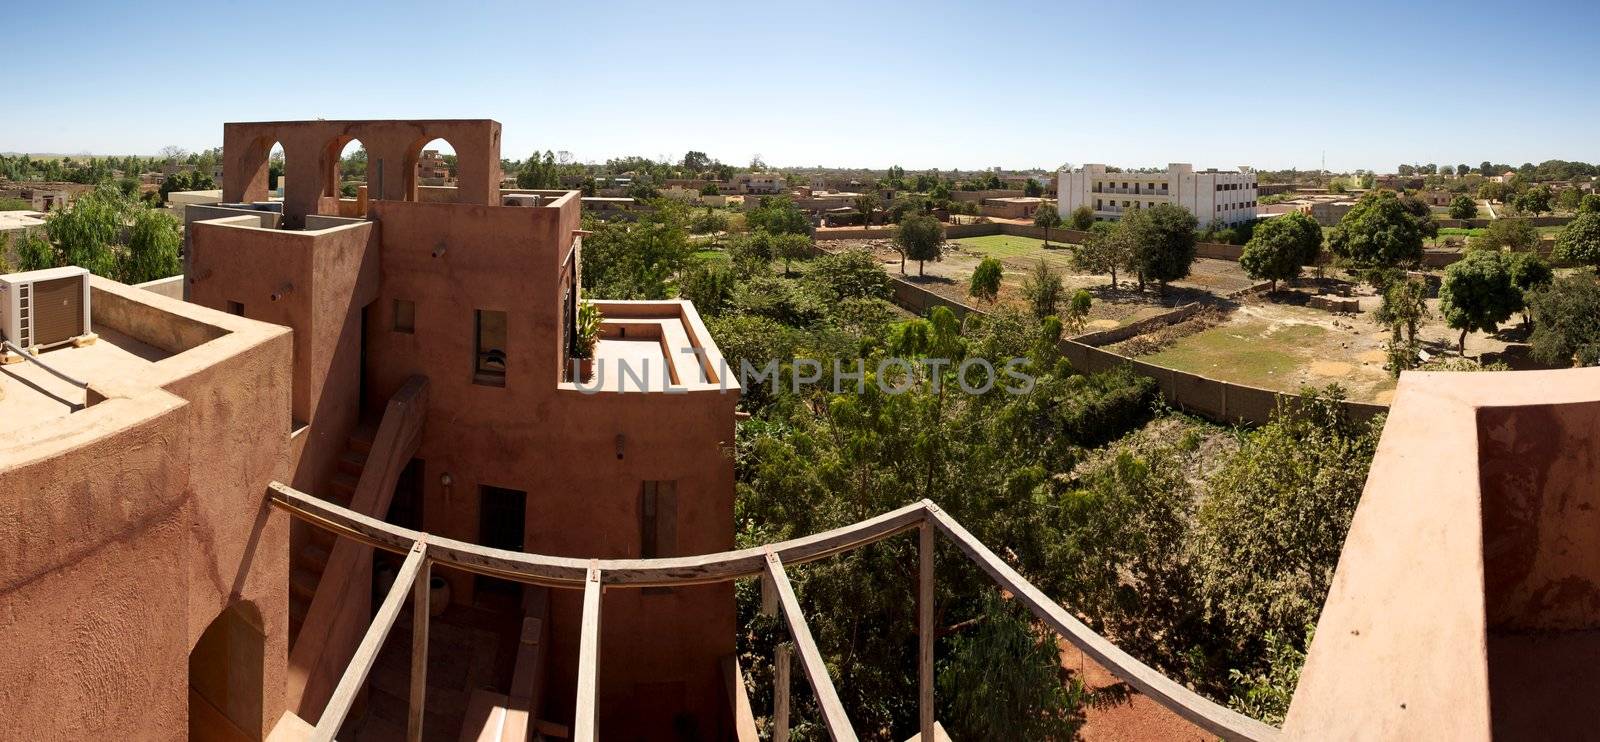 Panoramic view of Moroccan architecture in Mopti Dogon Land by watchtheworld